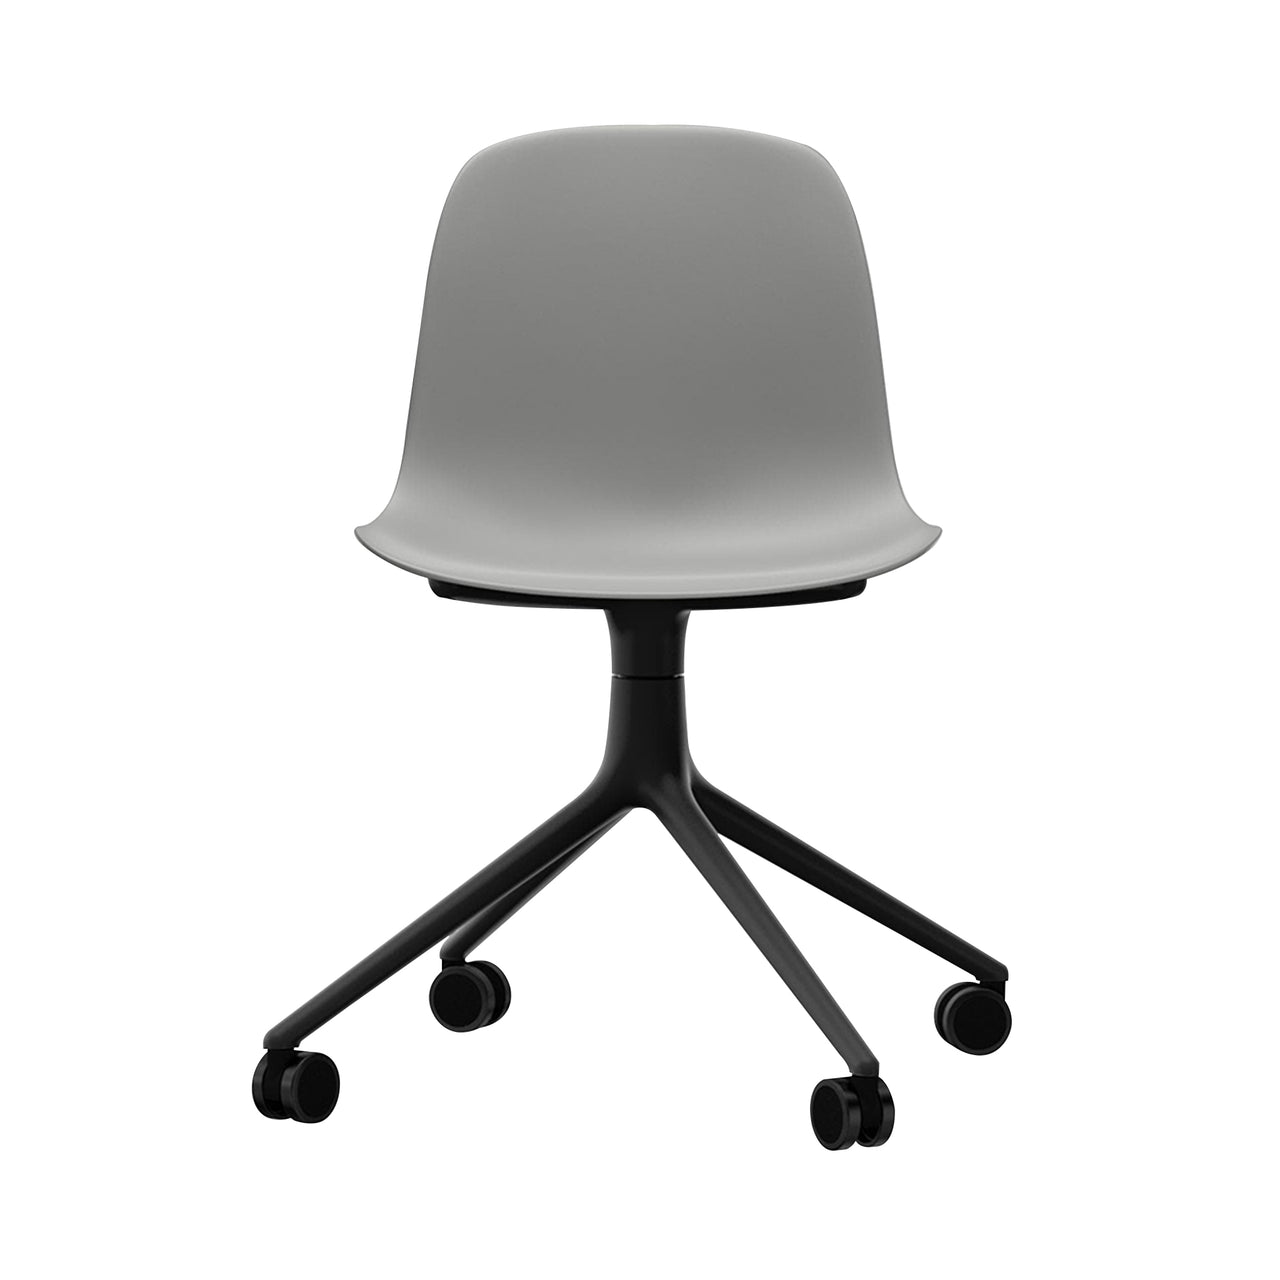 Form Chair: Swivel + Grey + Black Aluminum + With Casters